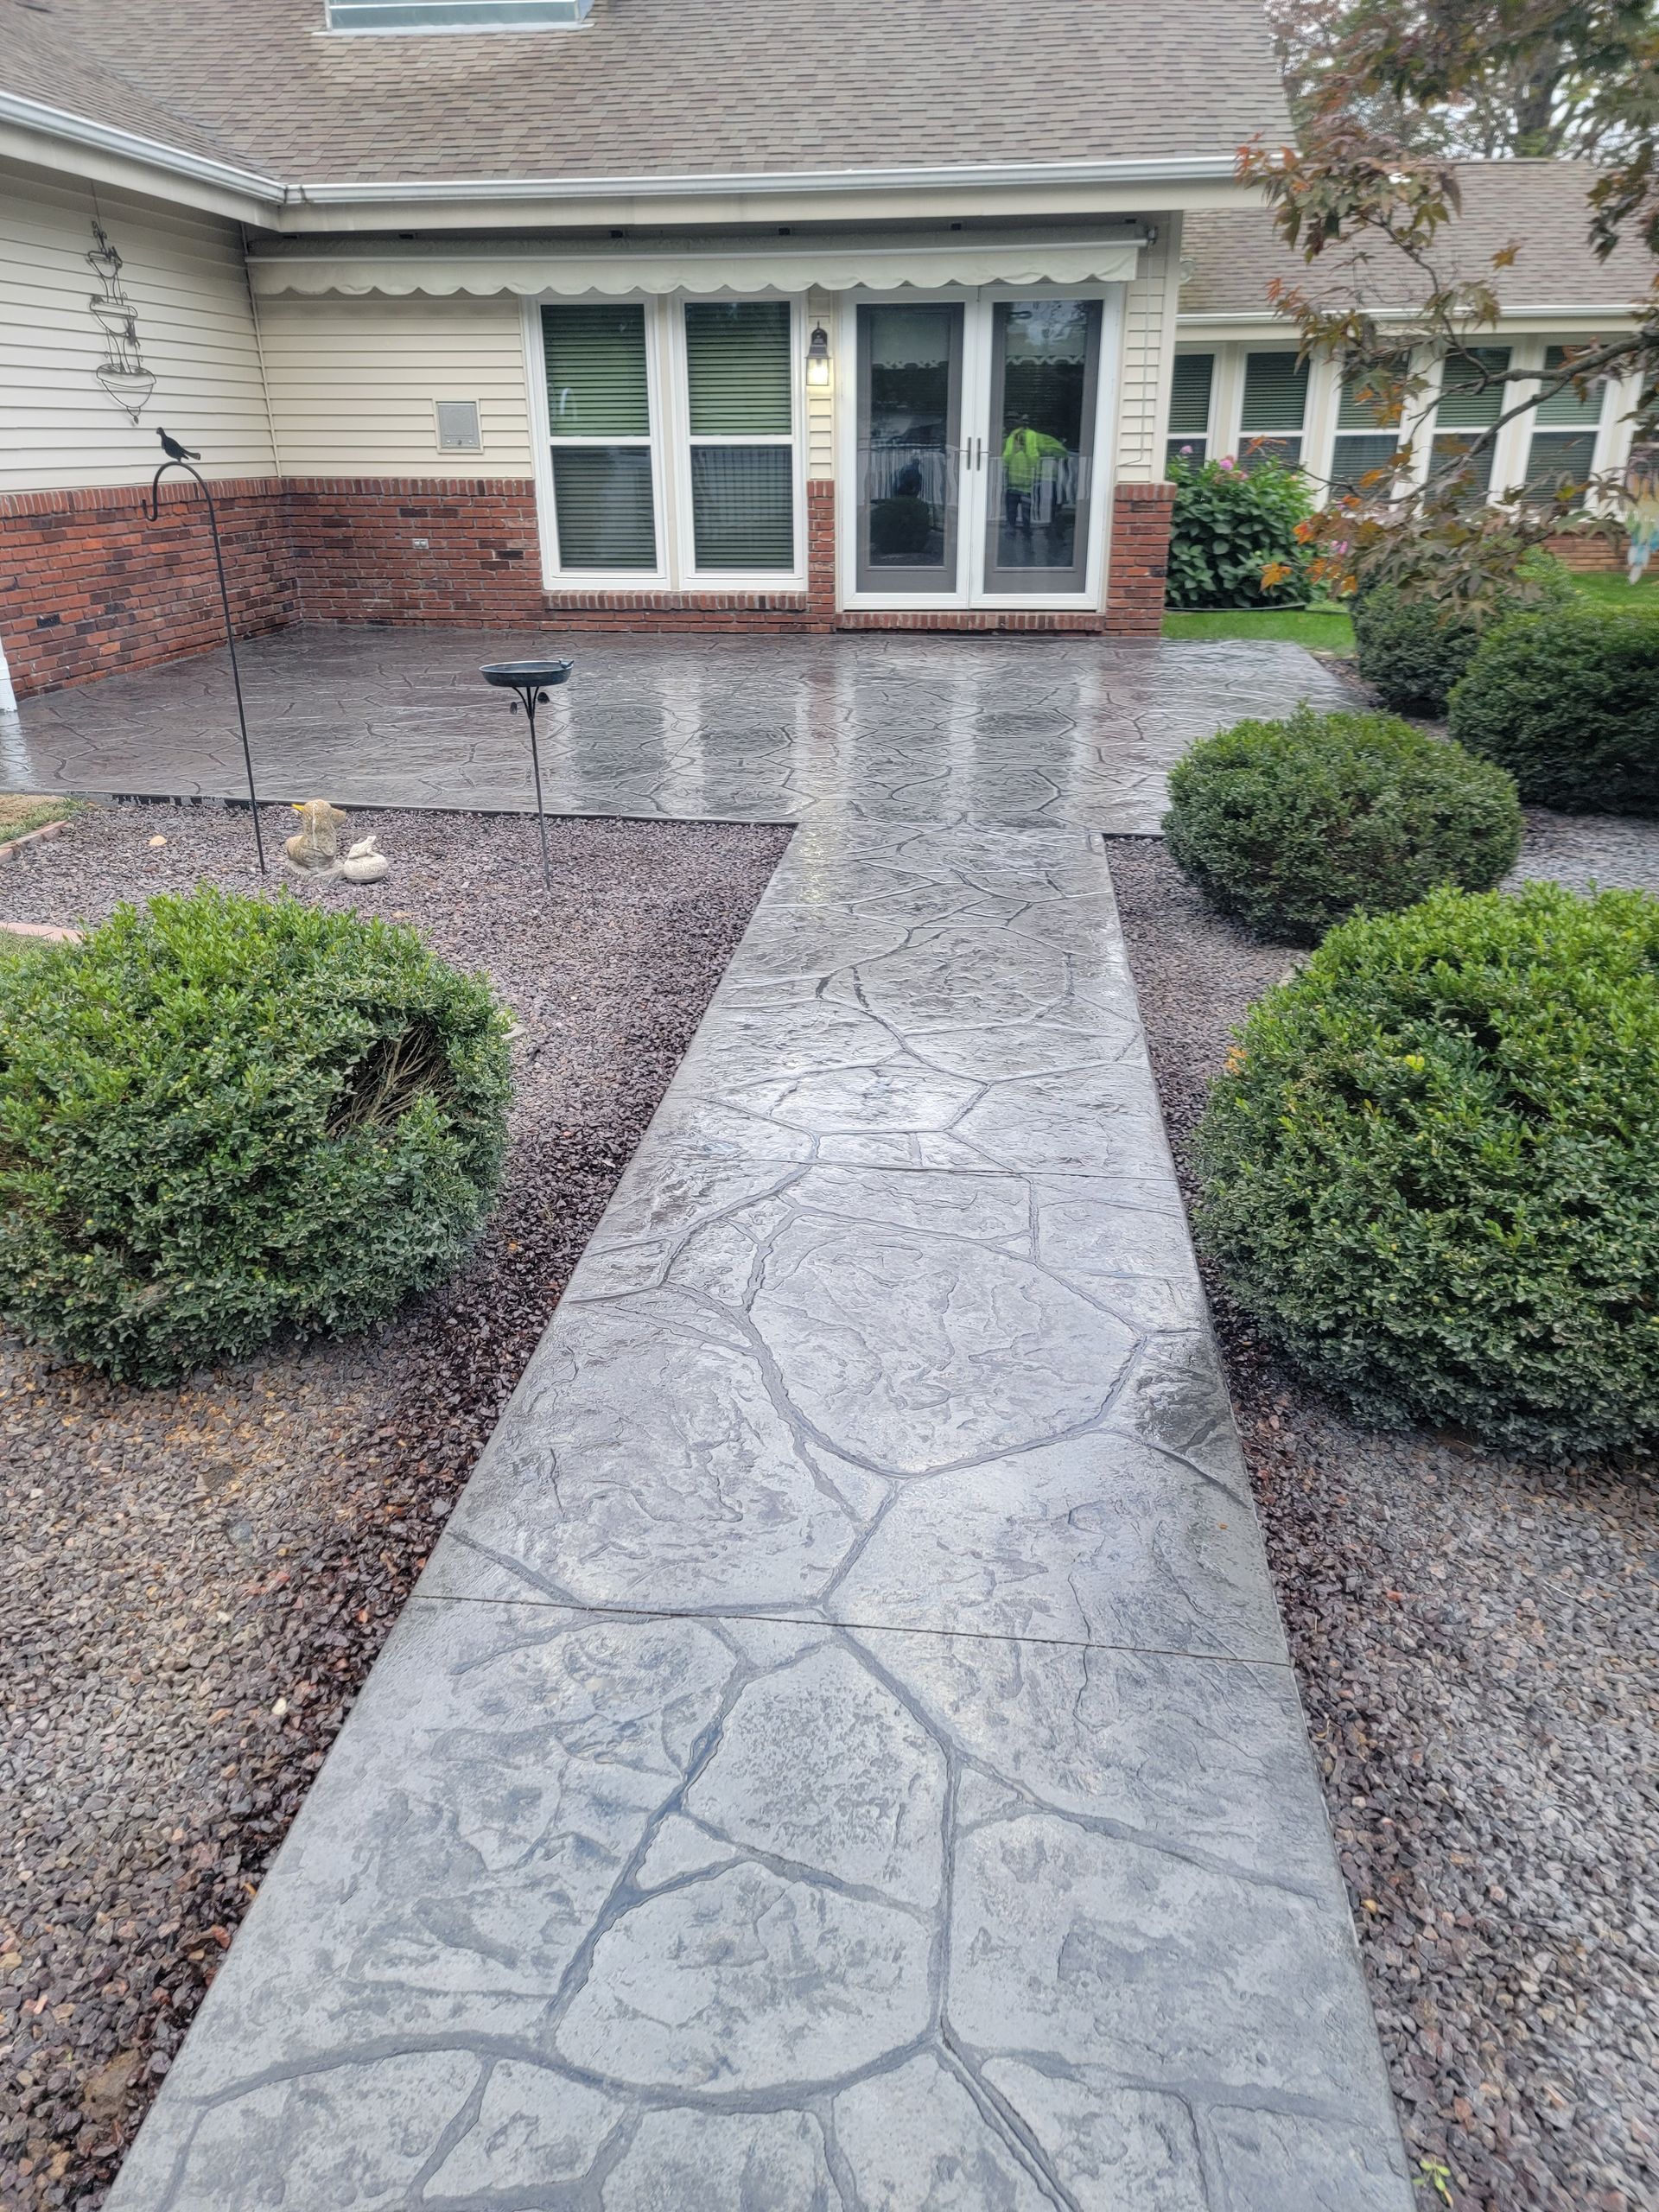 a grey stamped concrete walkway leading to a house surrounded by bushes and gravel .